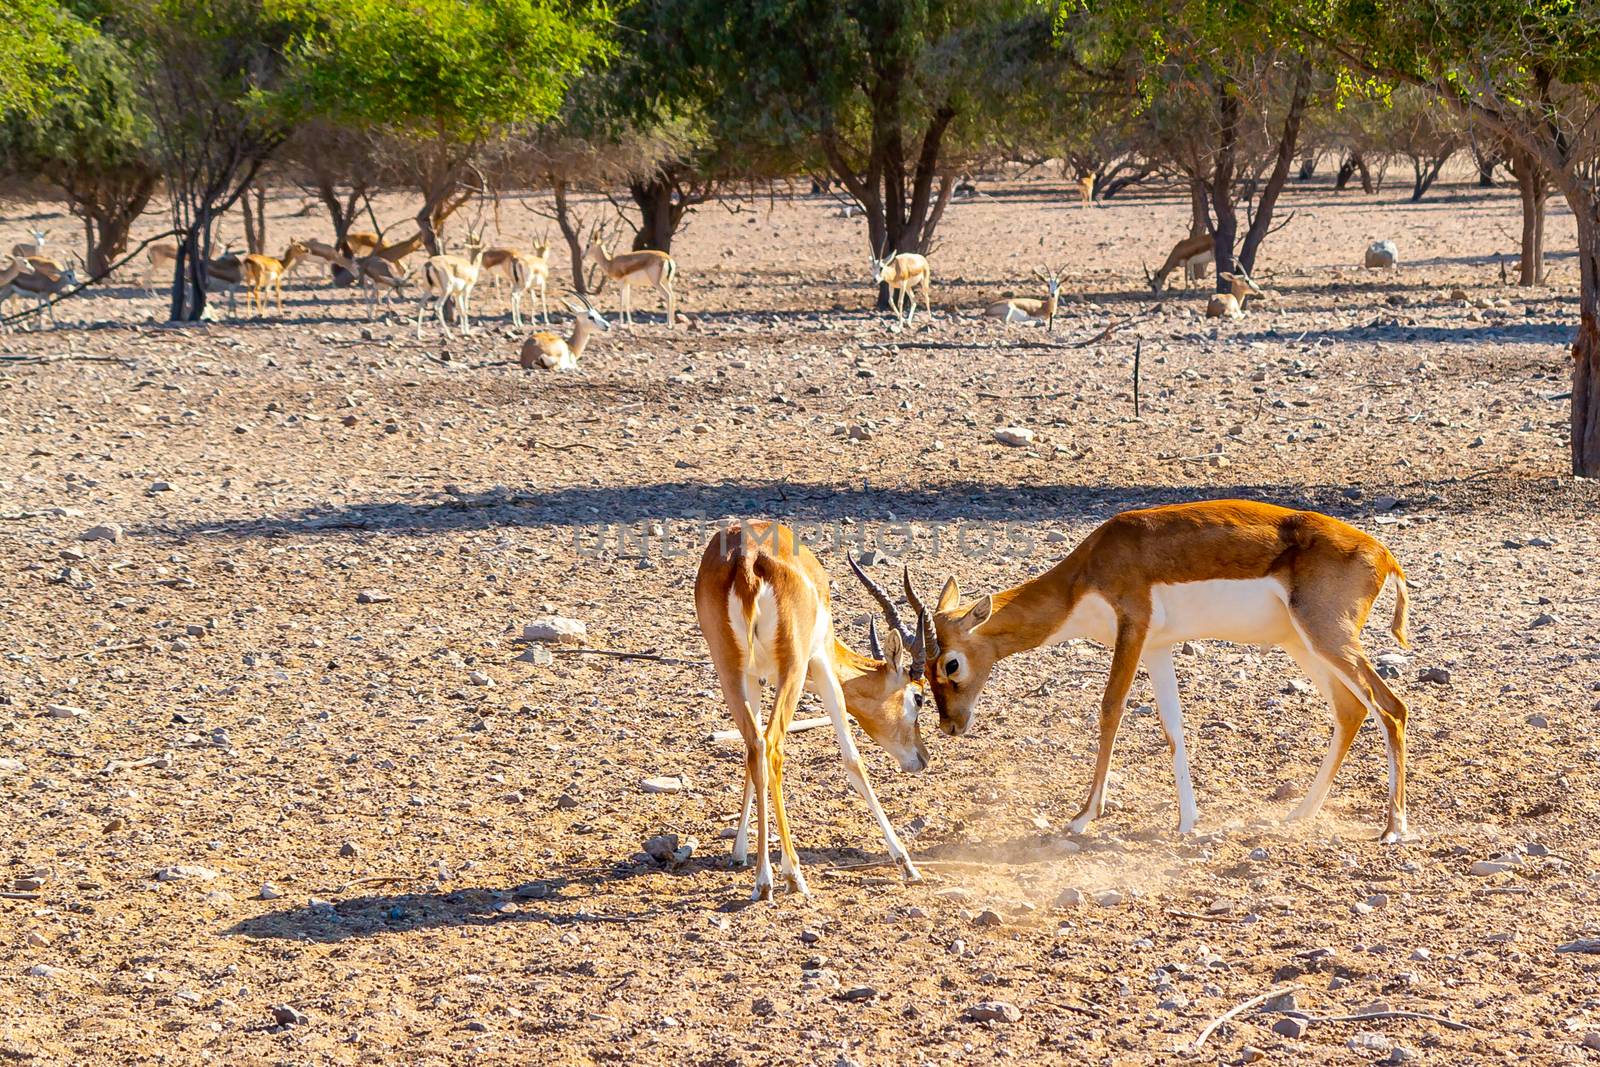 Fight of two young antelopes in a safari park on Sir Bani Yas Island, Abu Dhabi, UAE by galsand